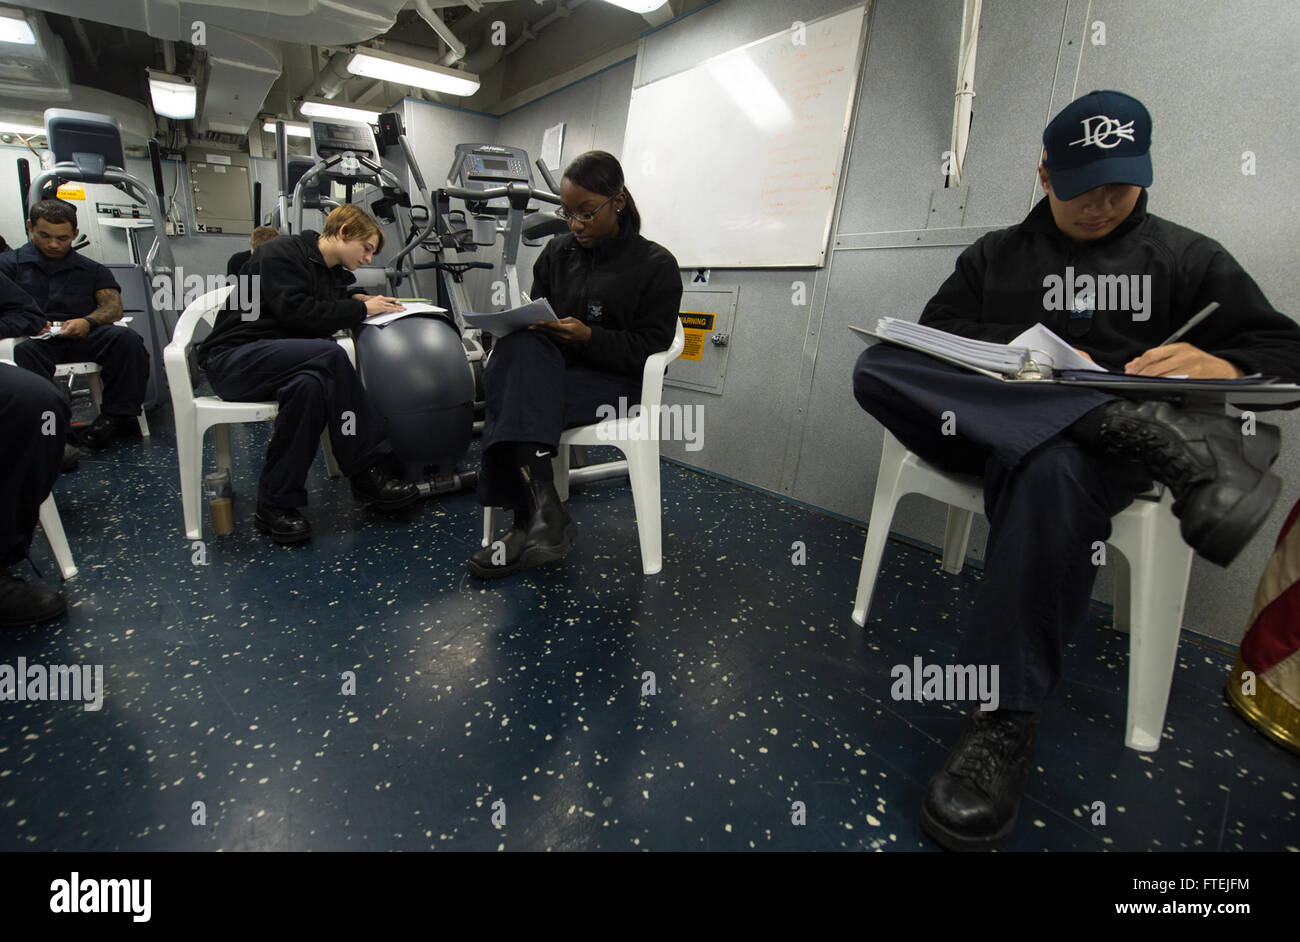 MEDITERRANEAN SEA (Dec. 3, 2014) - Sailors assigned to USS Donald Cook (DDG 75) take a maintenance and material management exam in the ready room. Donald Cook, an Arleigh Burke-class guided-missile destroyer, forward-deployed to Rota, Spain, is conducting naval operations in the U.S. 6th Fleet area of operations in support of U.S. national security interests in Europe. Stock Photo